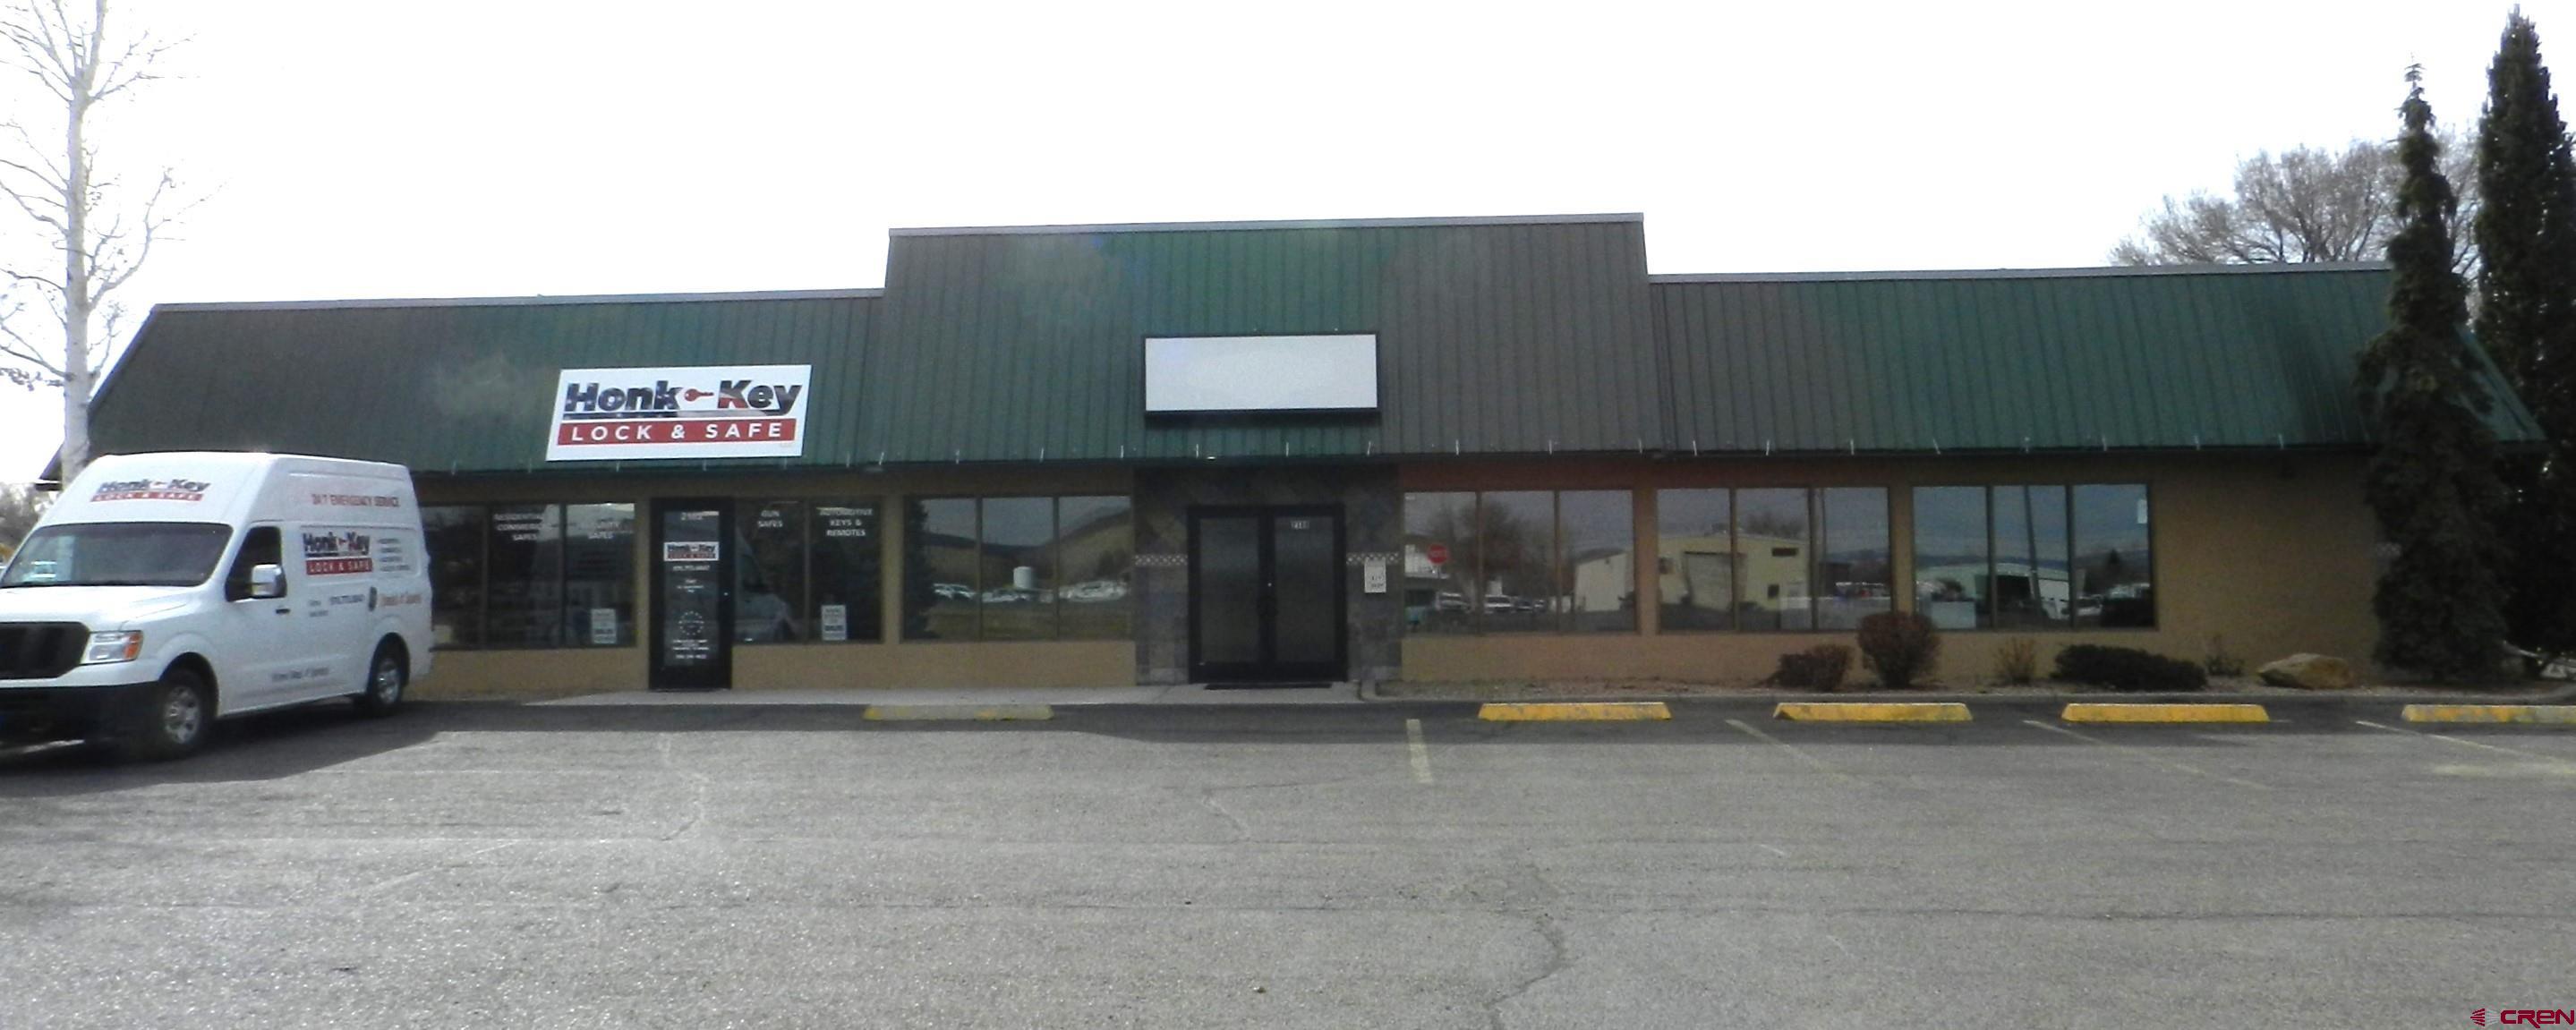 Three commercial buildings totaling ~14,906 sq.ft. on a ~.97-acre, privacy fenced back lot, adjacent to Hwy 50, between Turner Automotive and Stay Wise Inn. Building #1 is ~9040 sq.ft. and includes retail showroom, 3+ offices, and warehouse with an overhead door. Building #2 is ~920 sq.ft. and has a kitchenette. Building #3 is ~4,946 sq.ft. with an ADA bathroom, 3 large overhead doors, and hydraulic lift table loading dock. Building #4 is not included in sale and will be removed. Zoned B-3 in the City of Montrose. High-traffic count. Highly visible signage. Great location for your business. Business, FF&E can be included in sale of real estate for $1,475,000, business will not be sold separately.